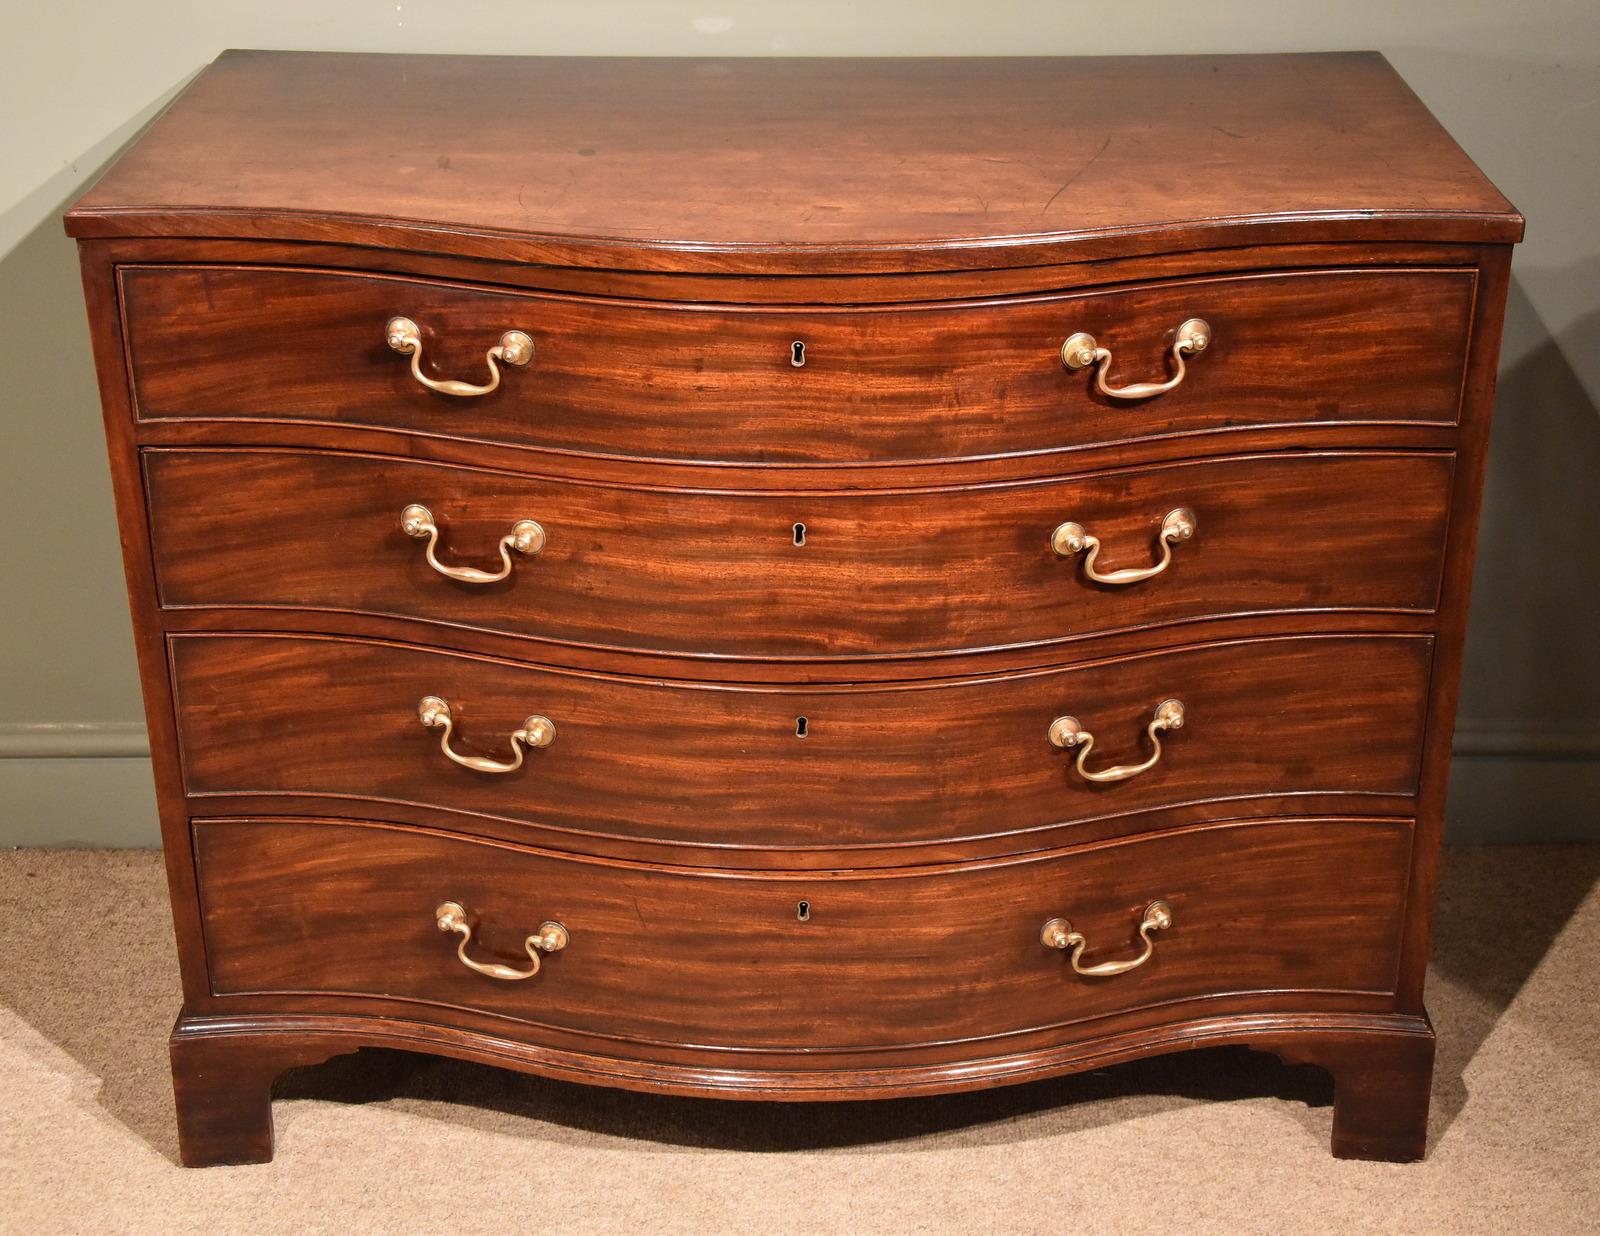 George III serpentine fronted mahogany chest of drawers in excellent original condition

Dimensions:
Height 34” (87cm)
Width 43